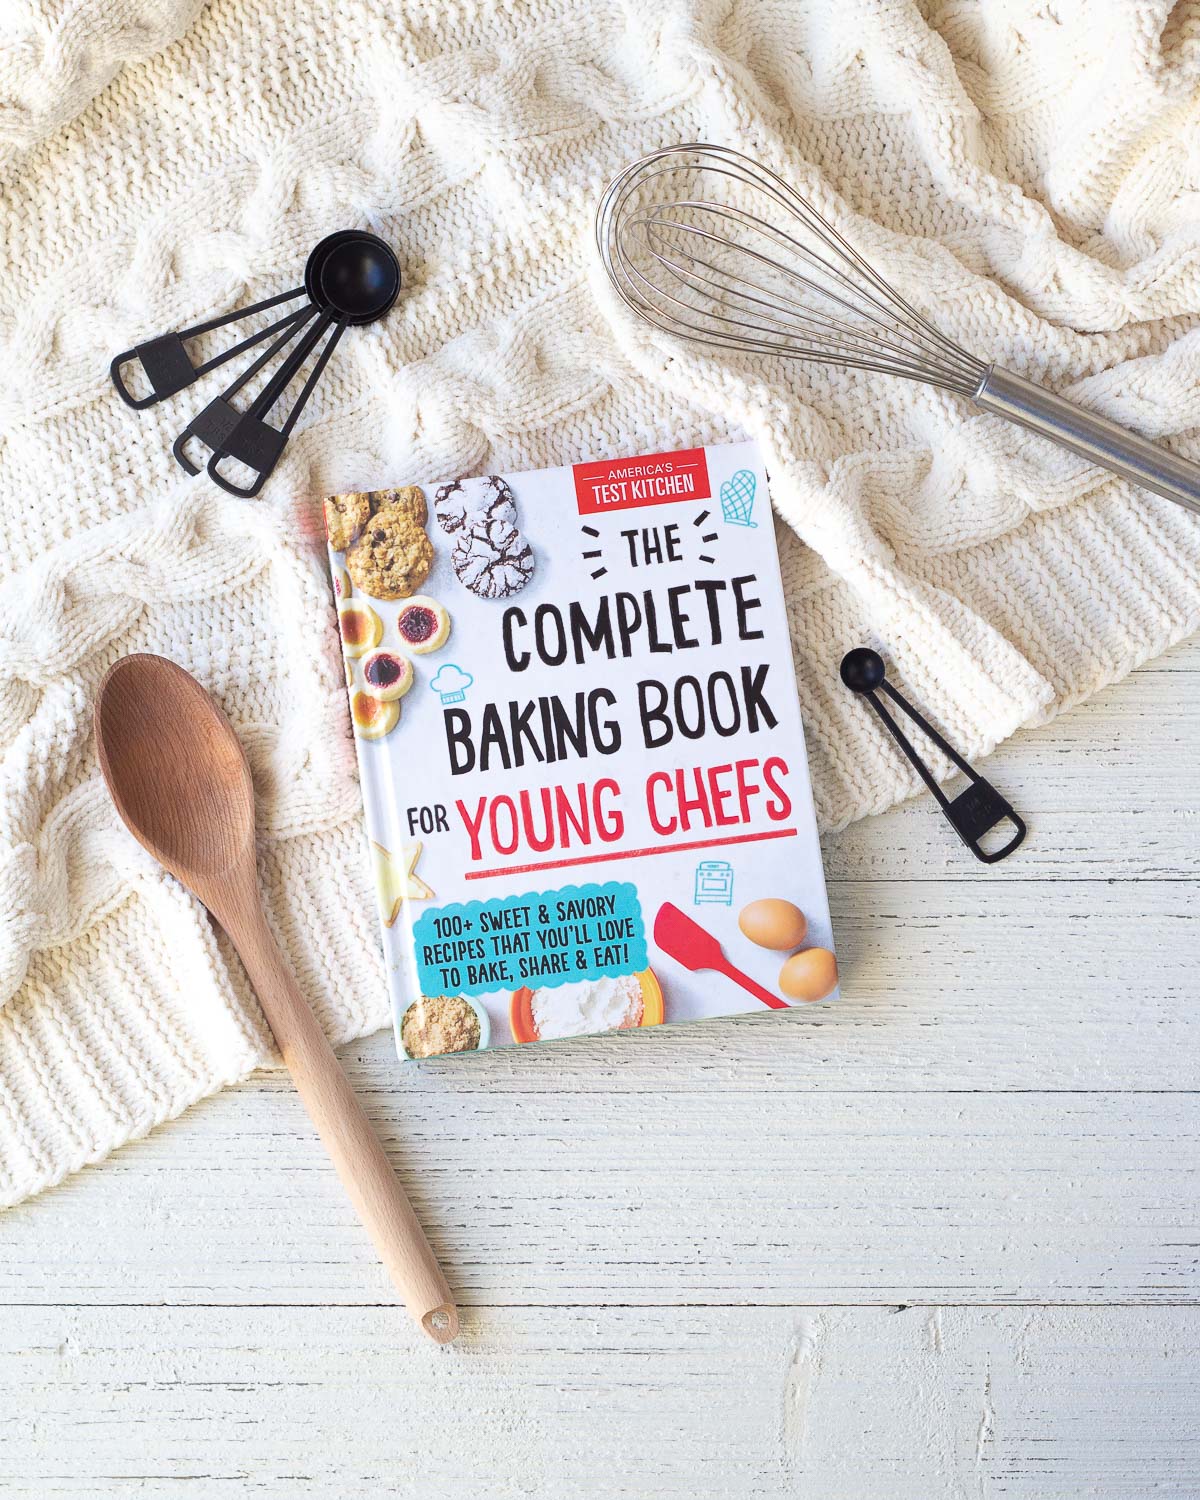 Favorite Baking Books for Kids…Filled with Delicious Kid-Friendly Baking Recipes!